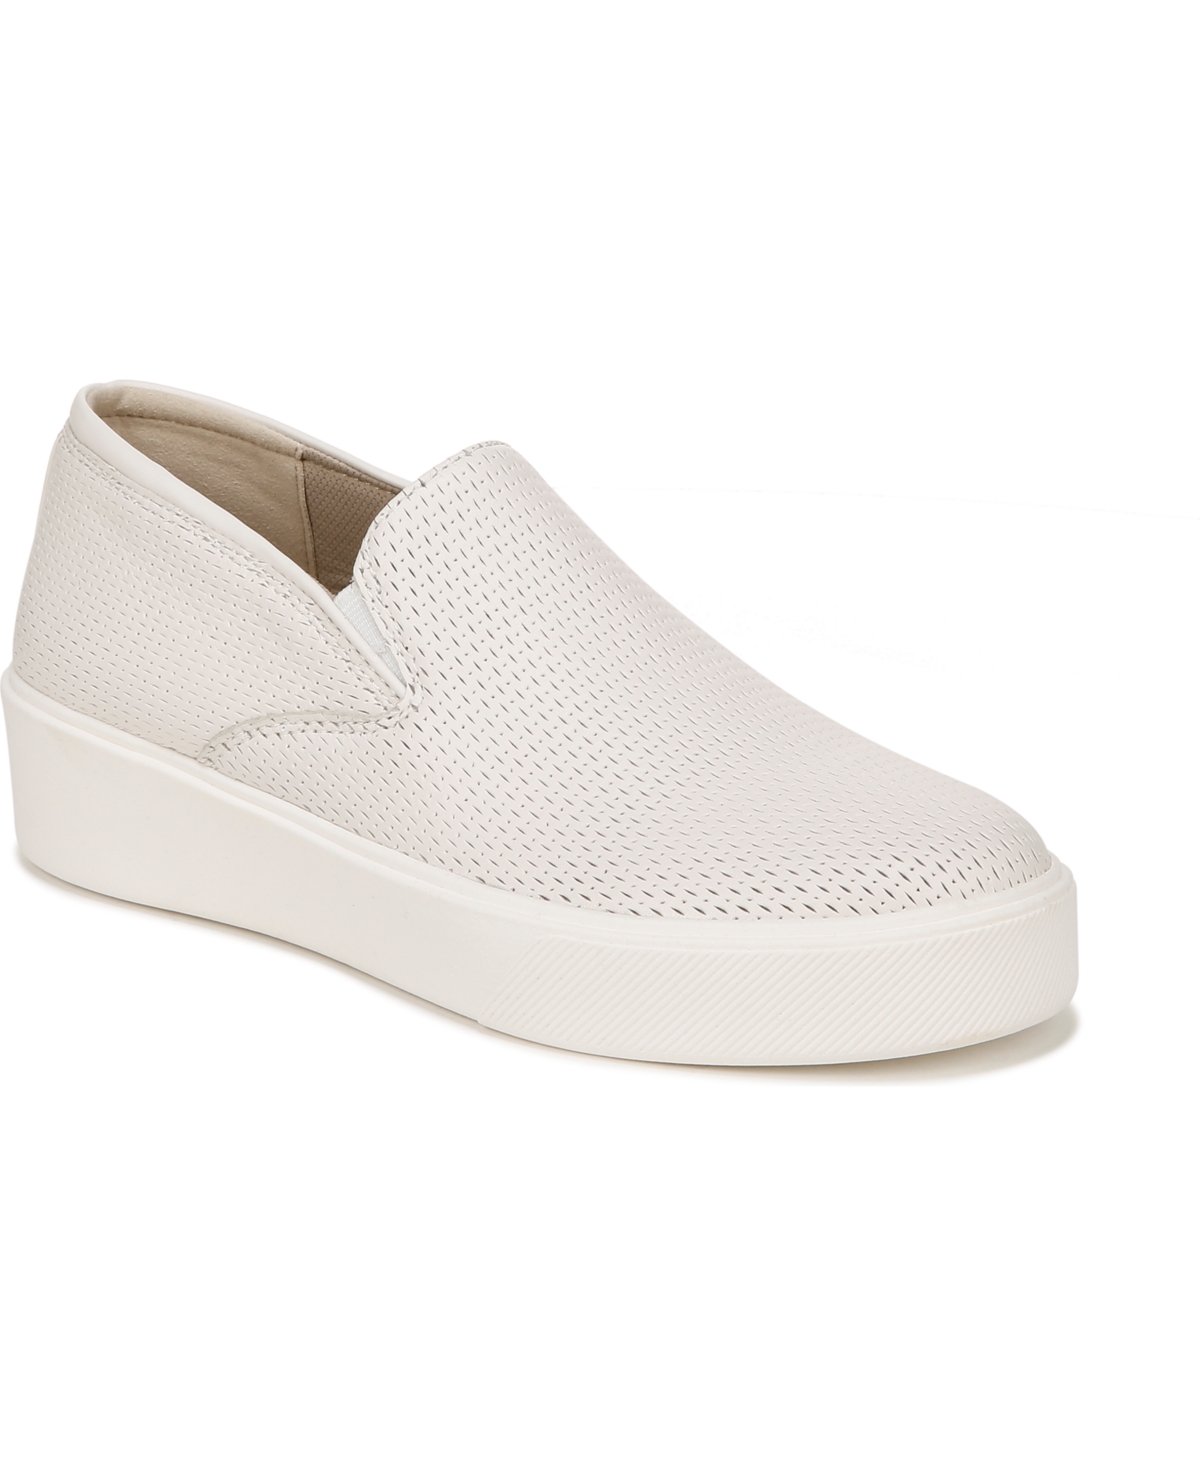 Marianne 3.0 Slip-on Sneakers - Warm White Leather